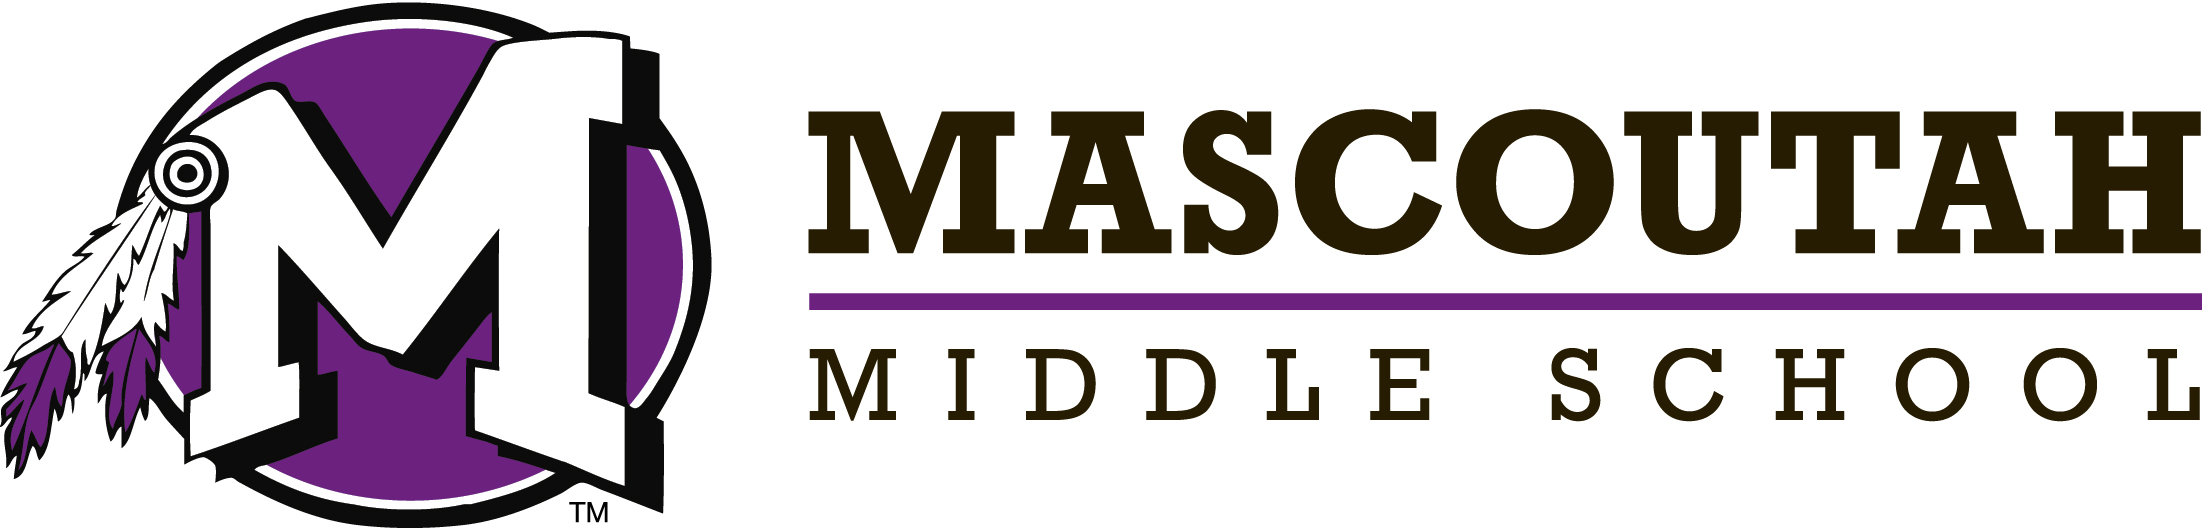 Mascoutah Middle School